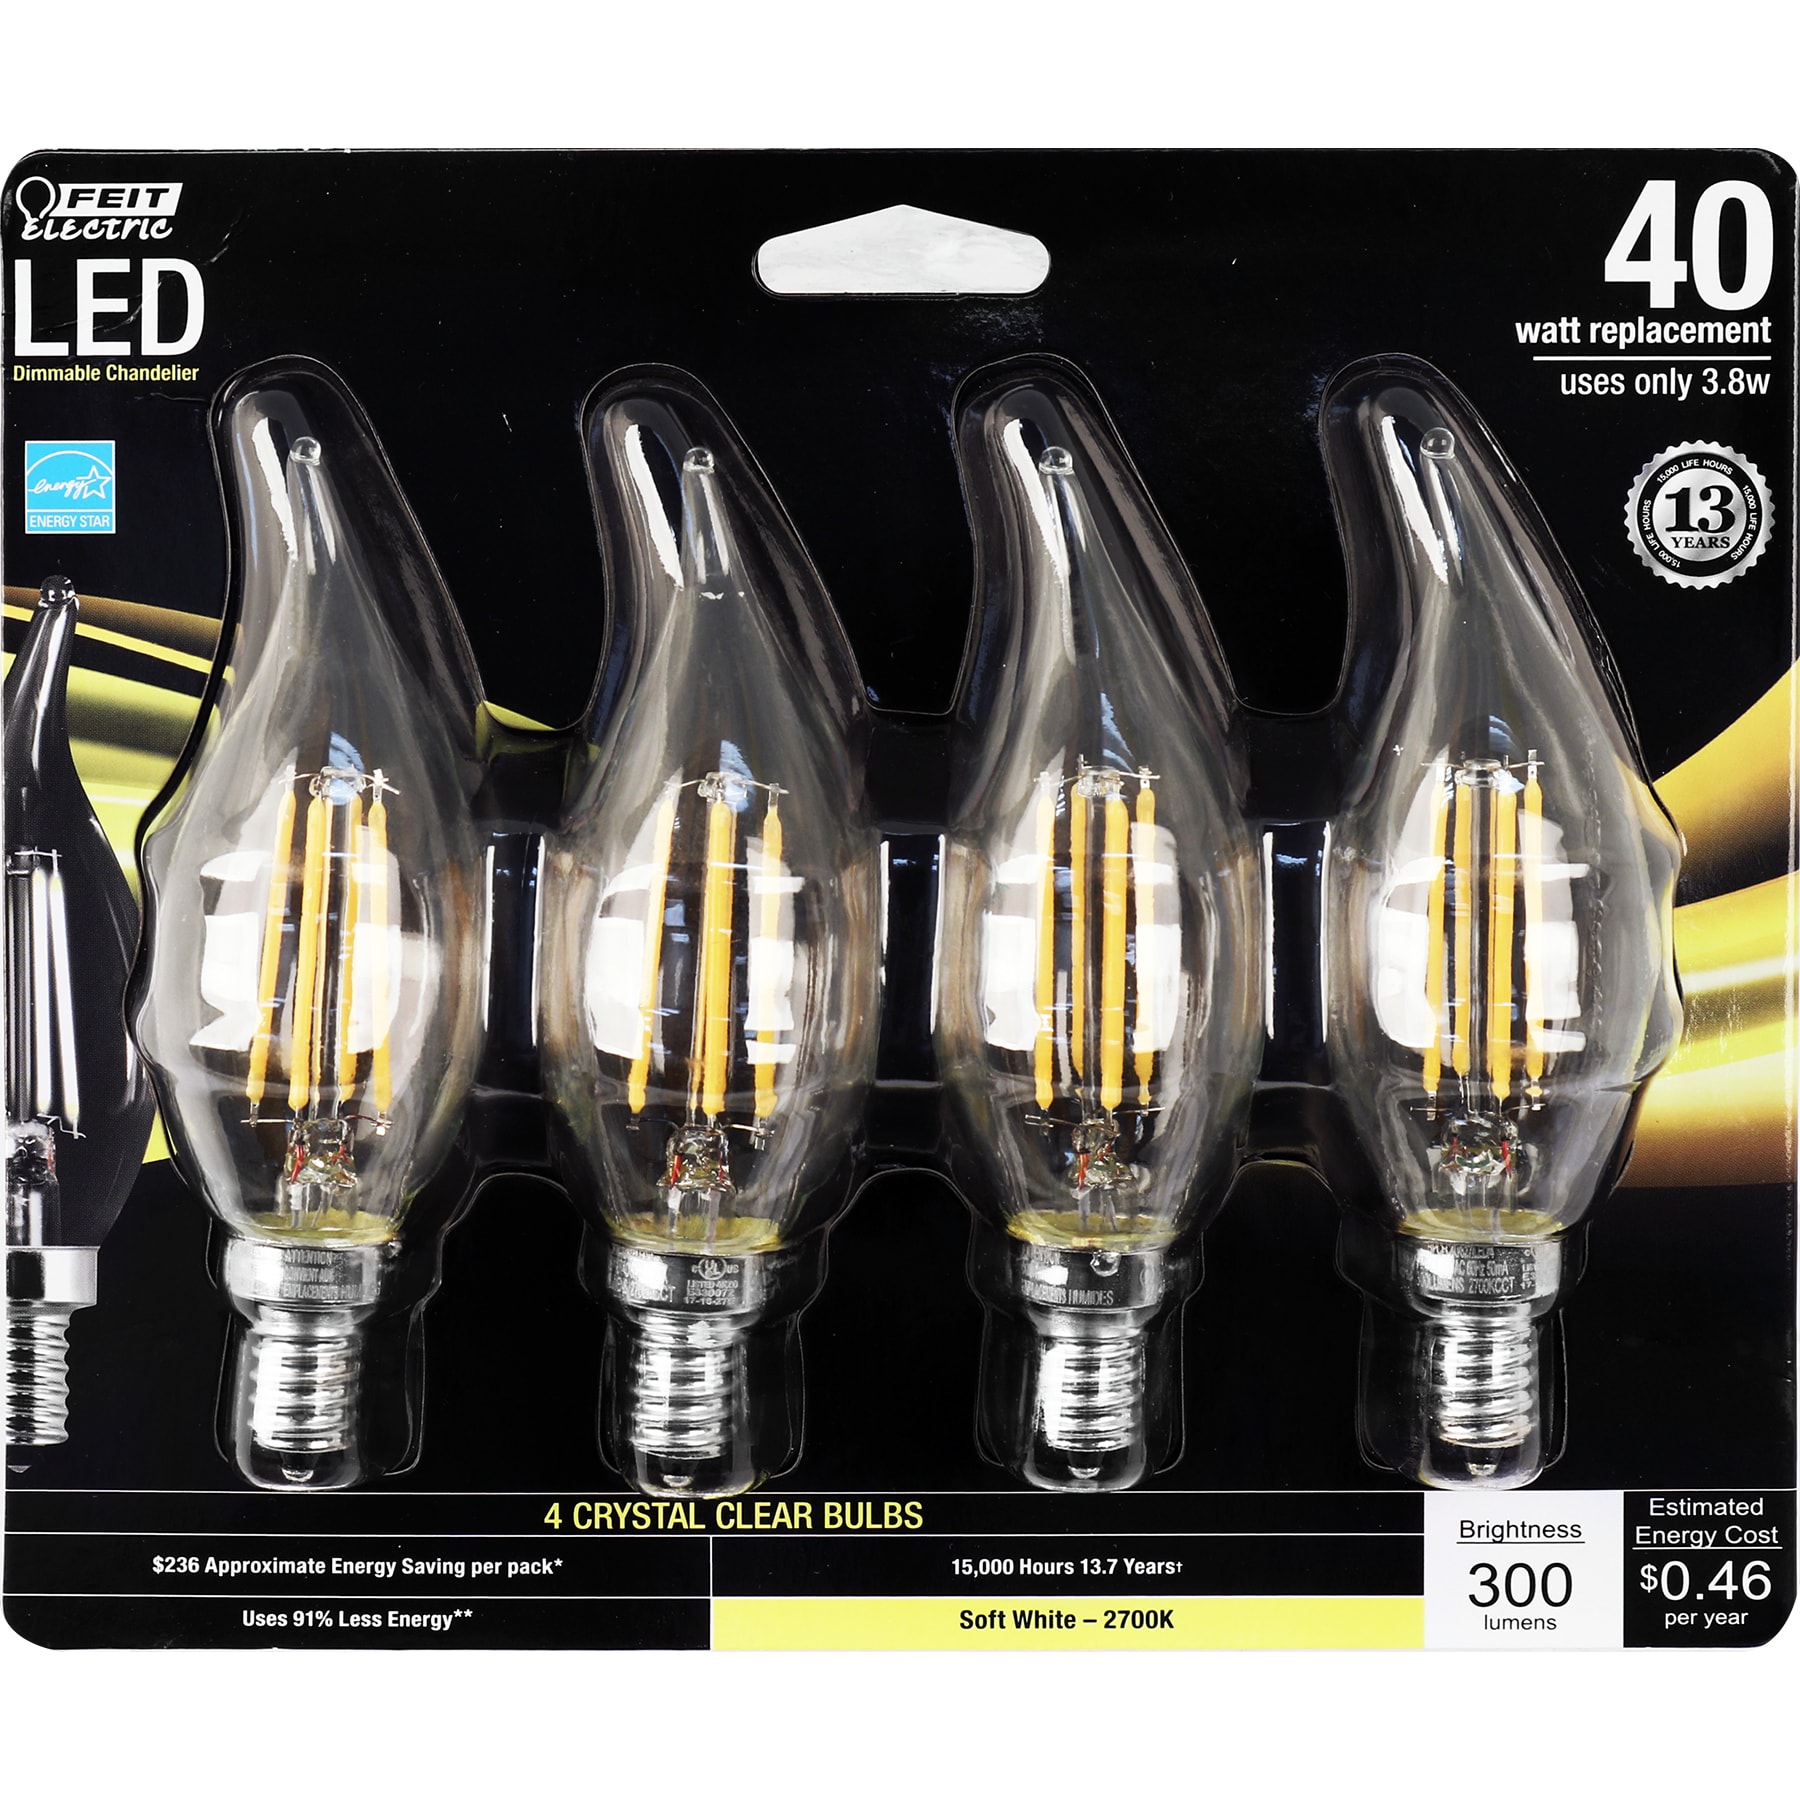 the Light Base at White Soft 40-Watt Bulb Bulbs Candelabra (4-Pack) department Electric EQ Decorative LED Feit Light (E-12) Dimmable in